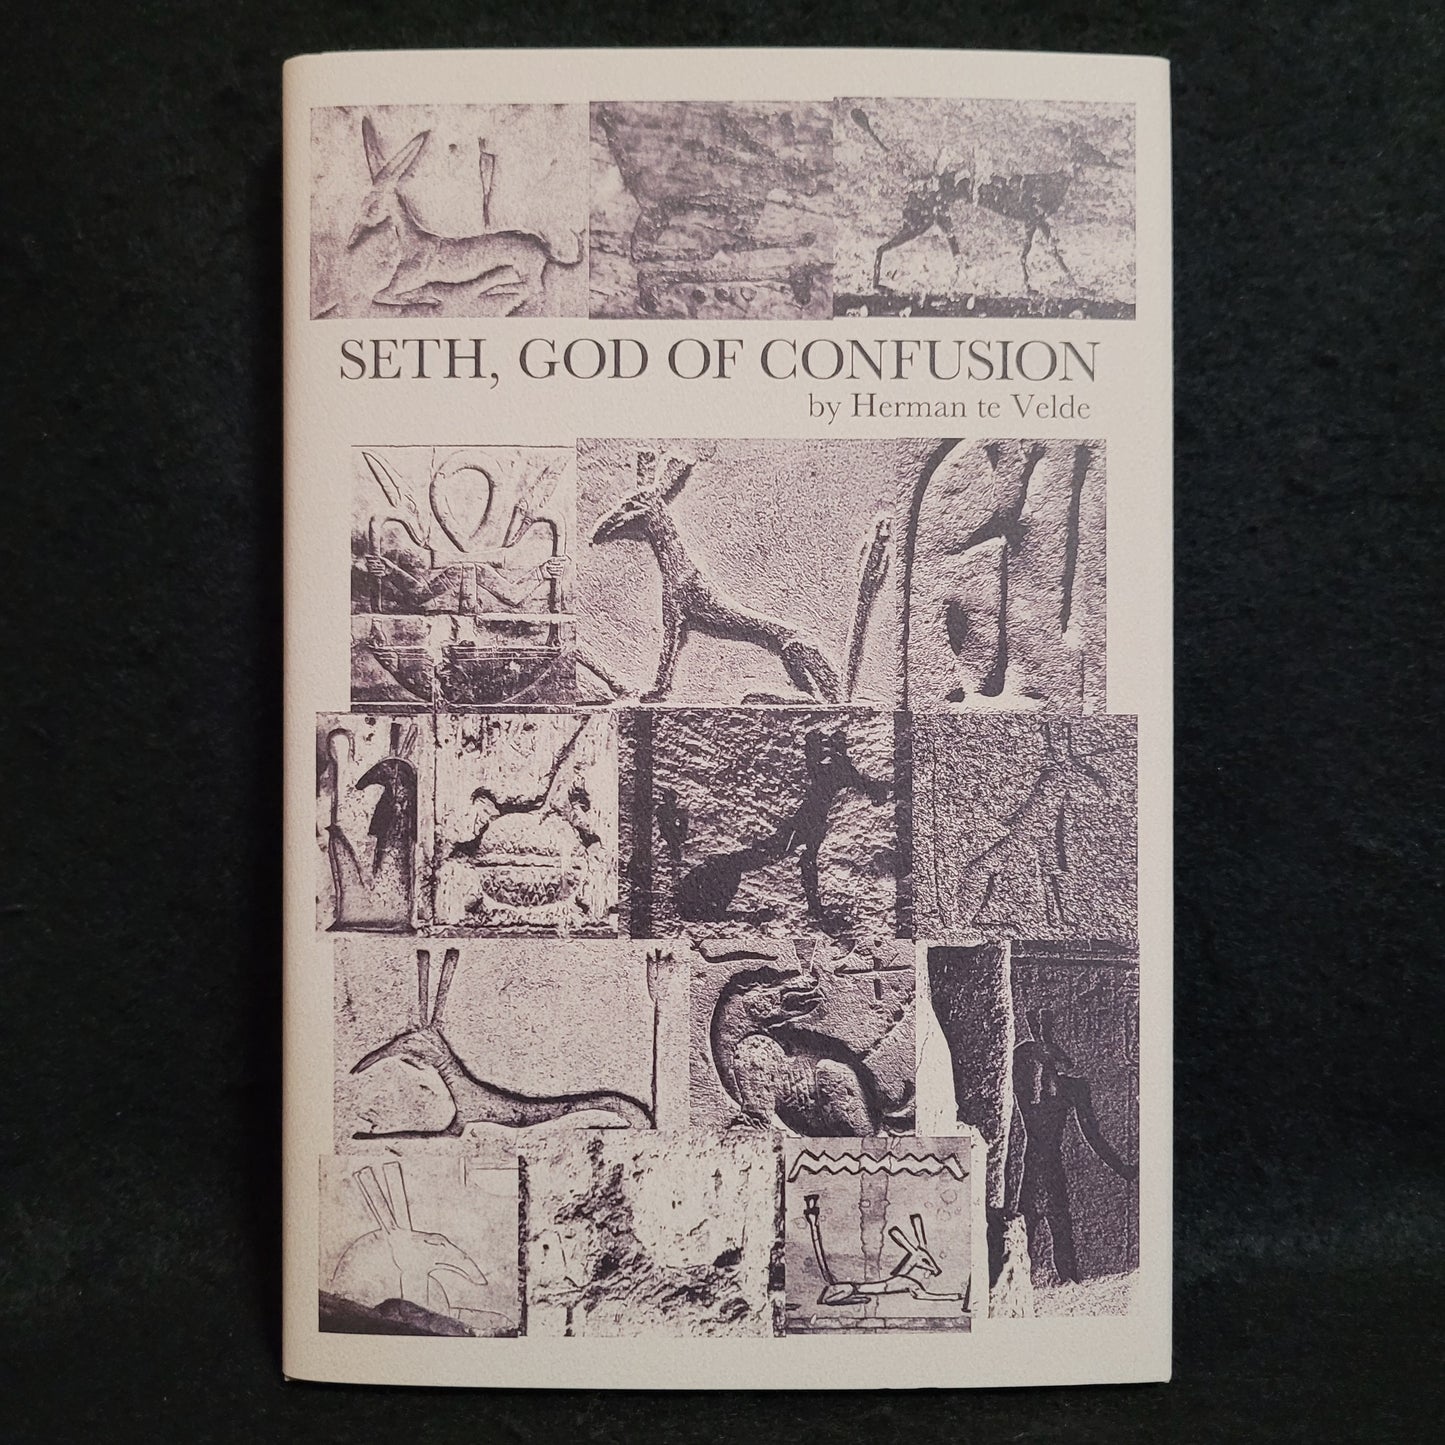 Seth, God of Confusion: A Study of His Role in Egyptian Mythology and Religion by Herman te Velde (Ajna Bound, 2020) Hardcover